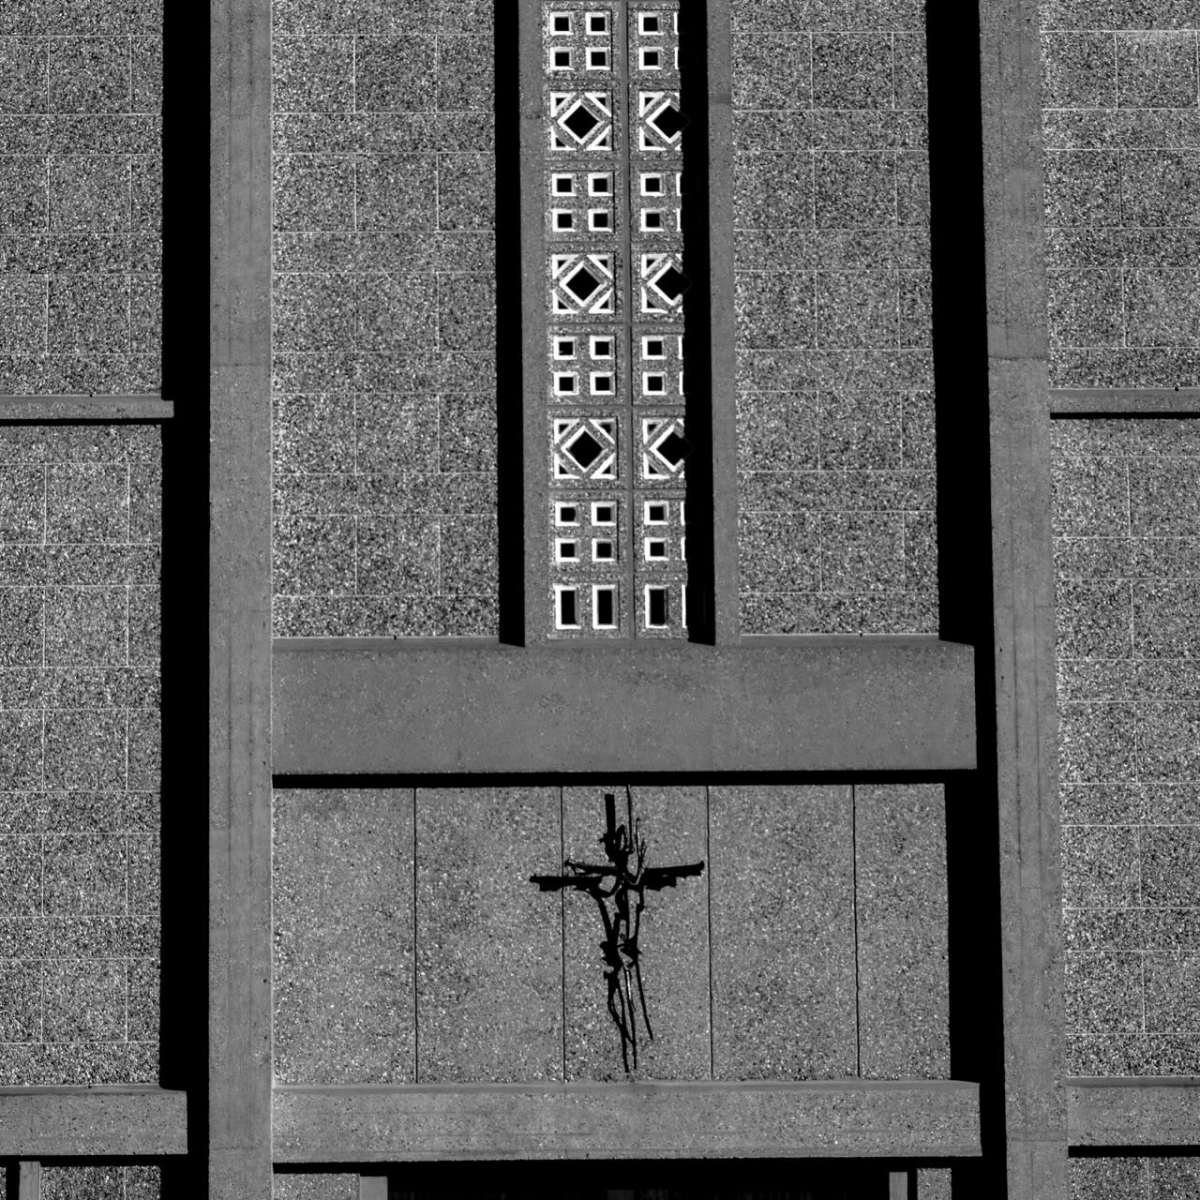 Crucifixion over the entrance to St. Joseph's Church in Le Havre in Normandy, France